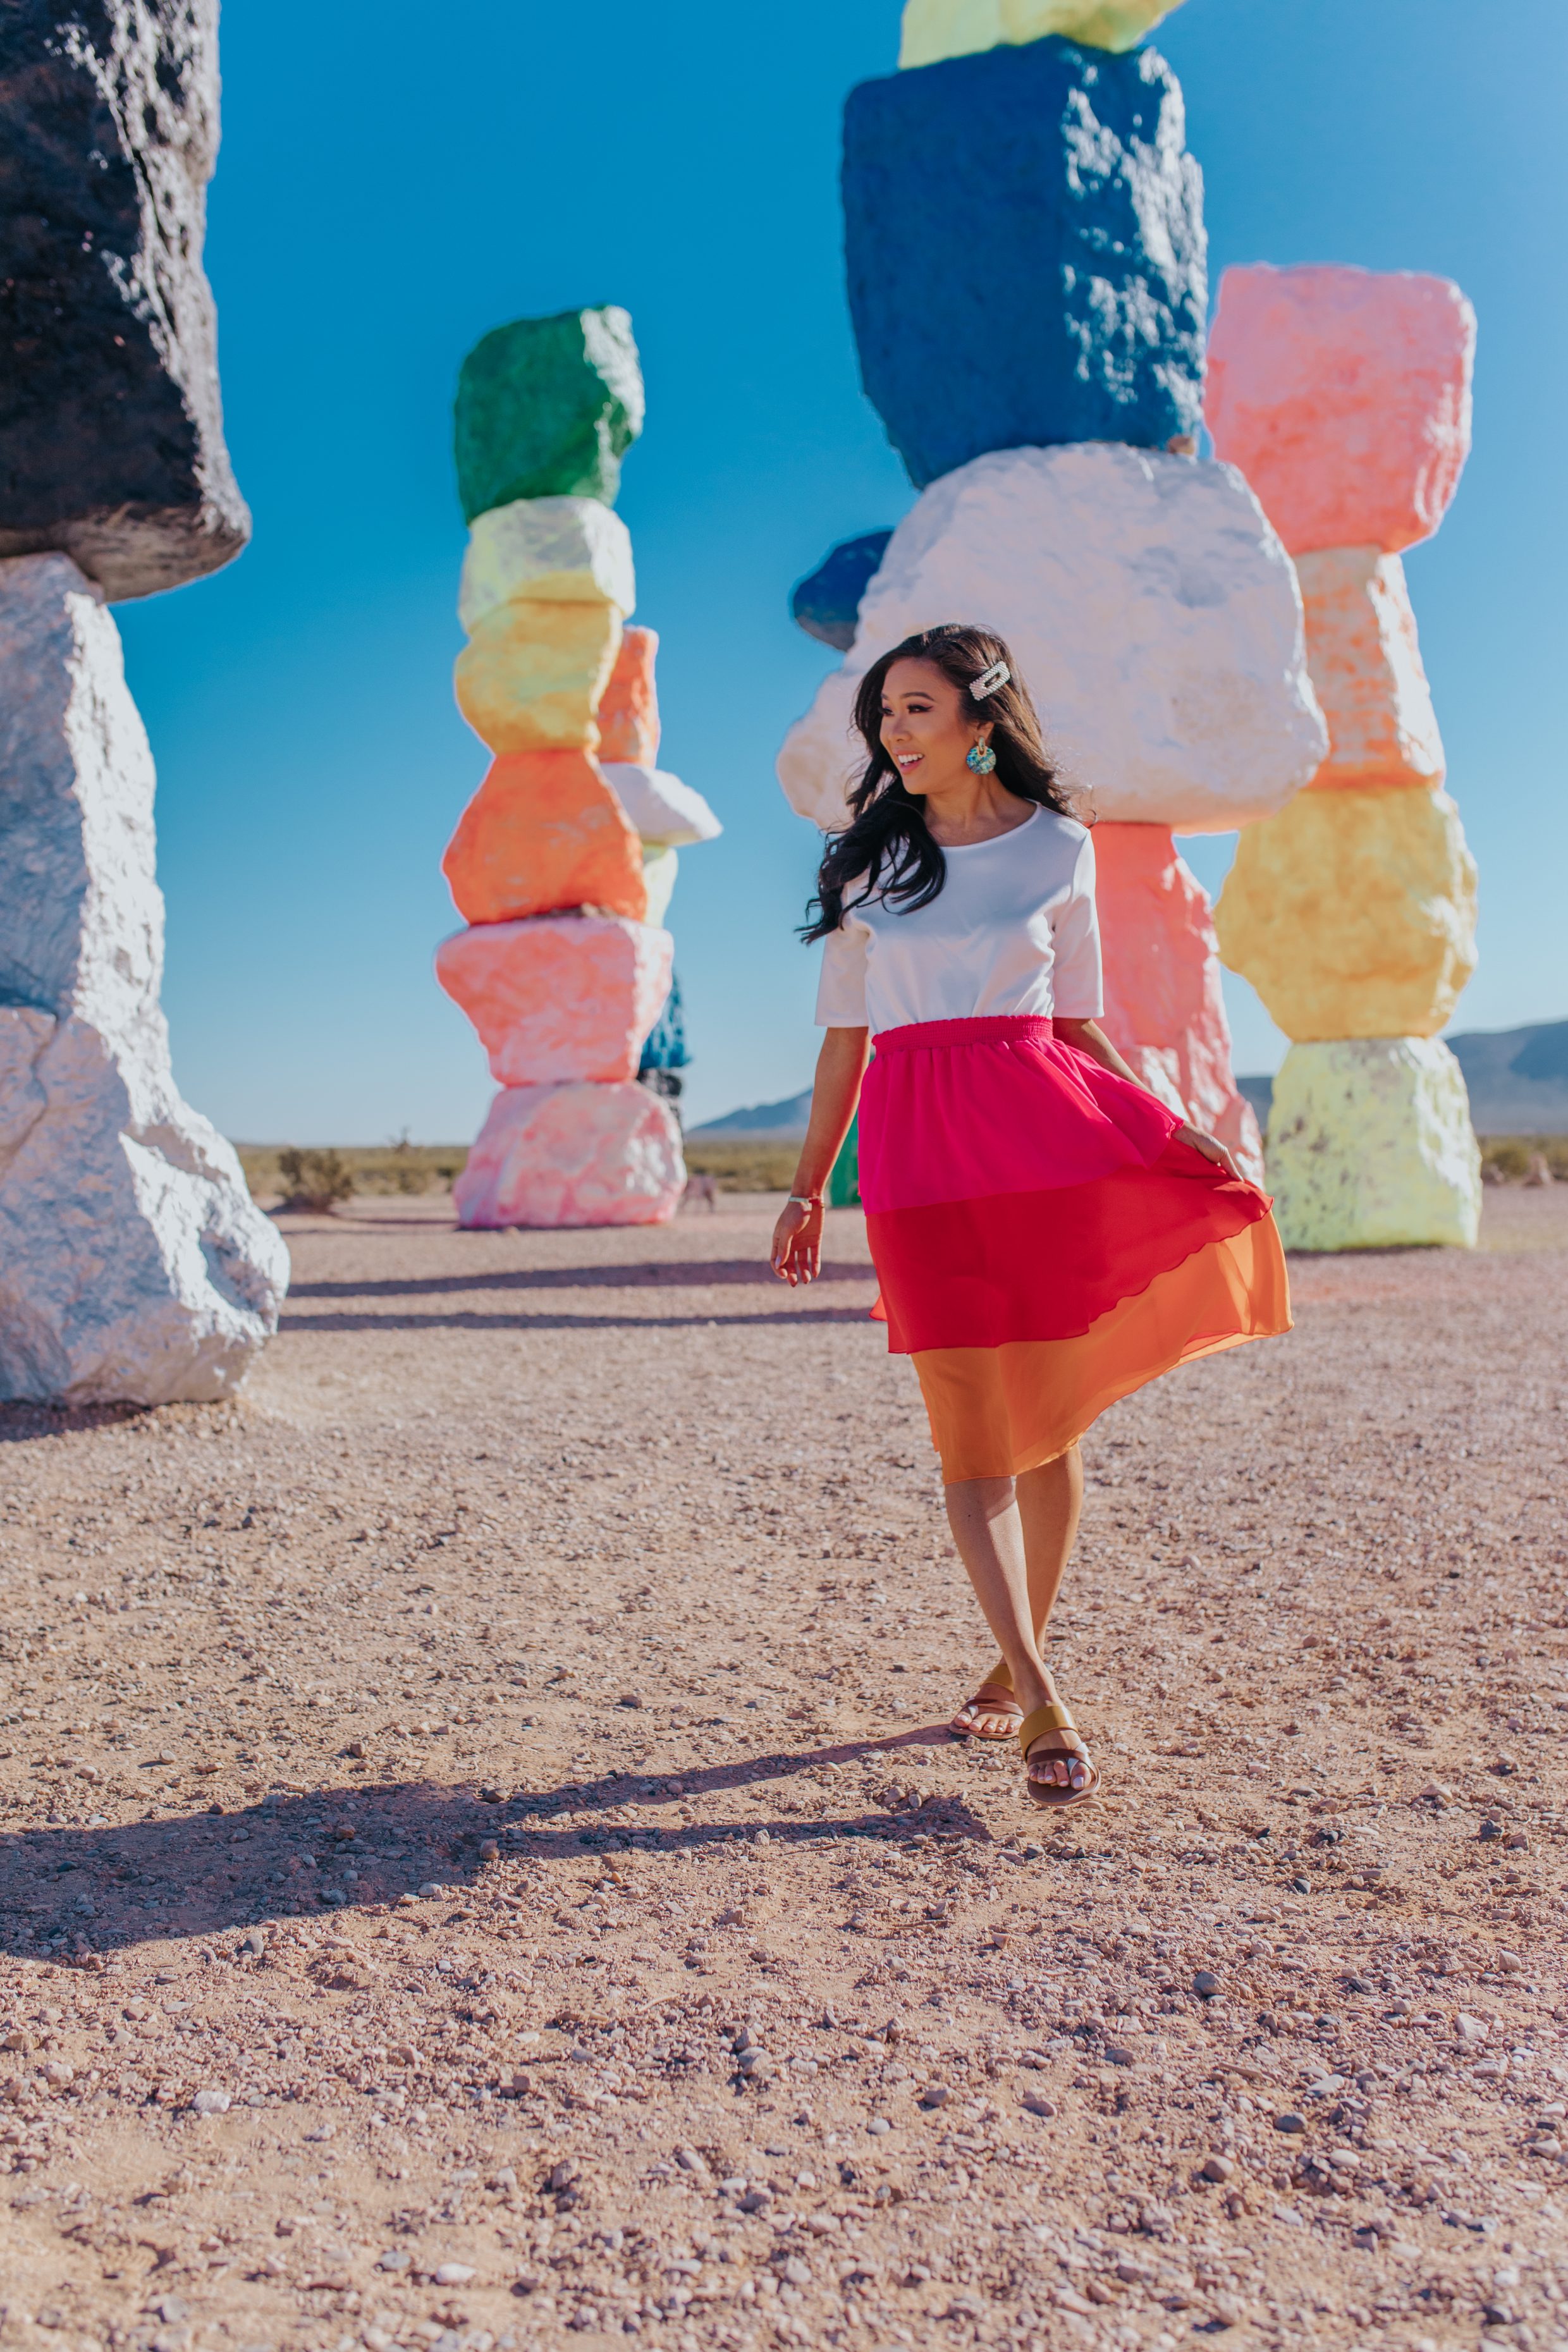 Hoang-Kim wears a white tee, colorful skirt and Dolce Vita Sandals at Seven Magic Mountains